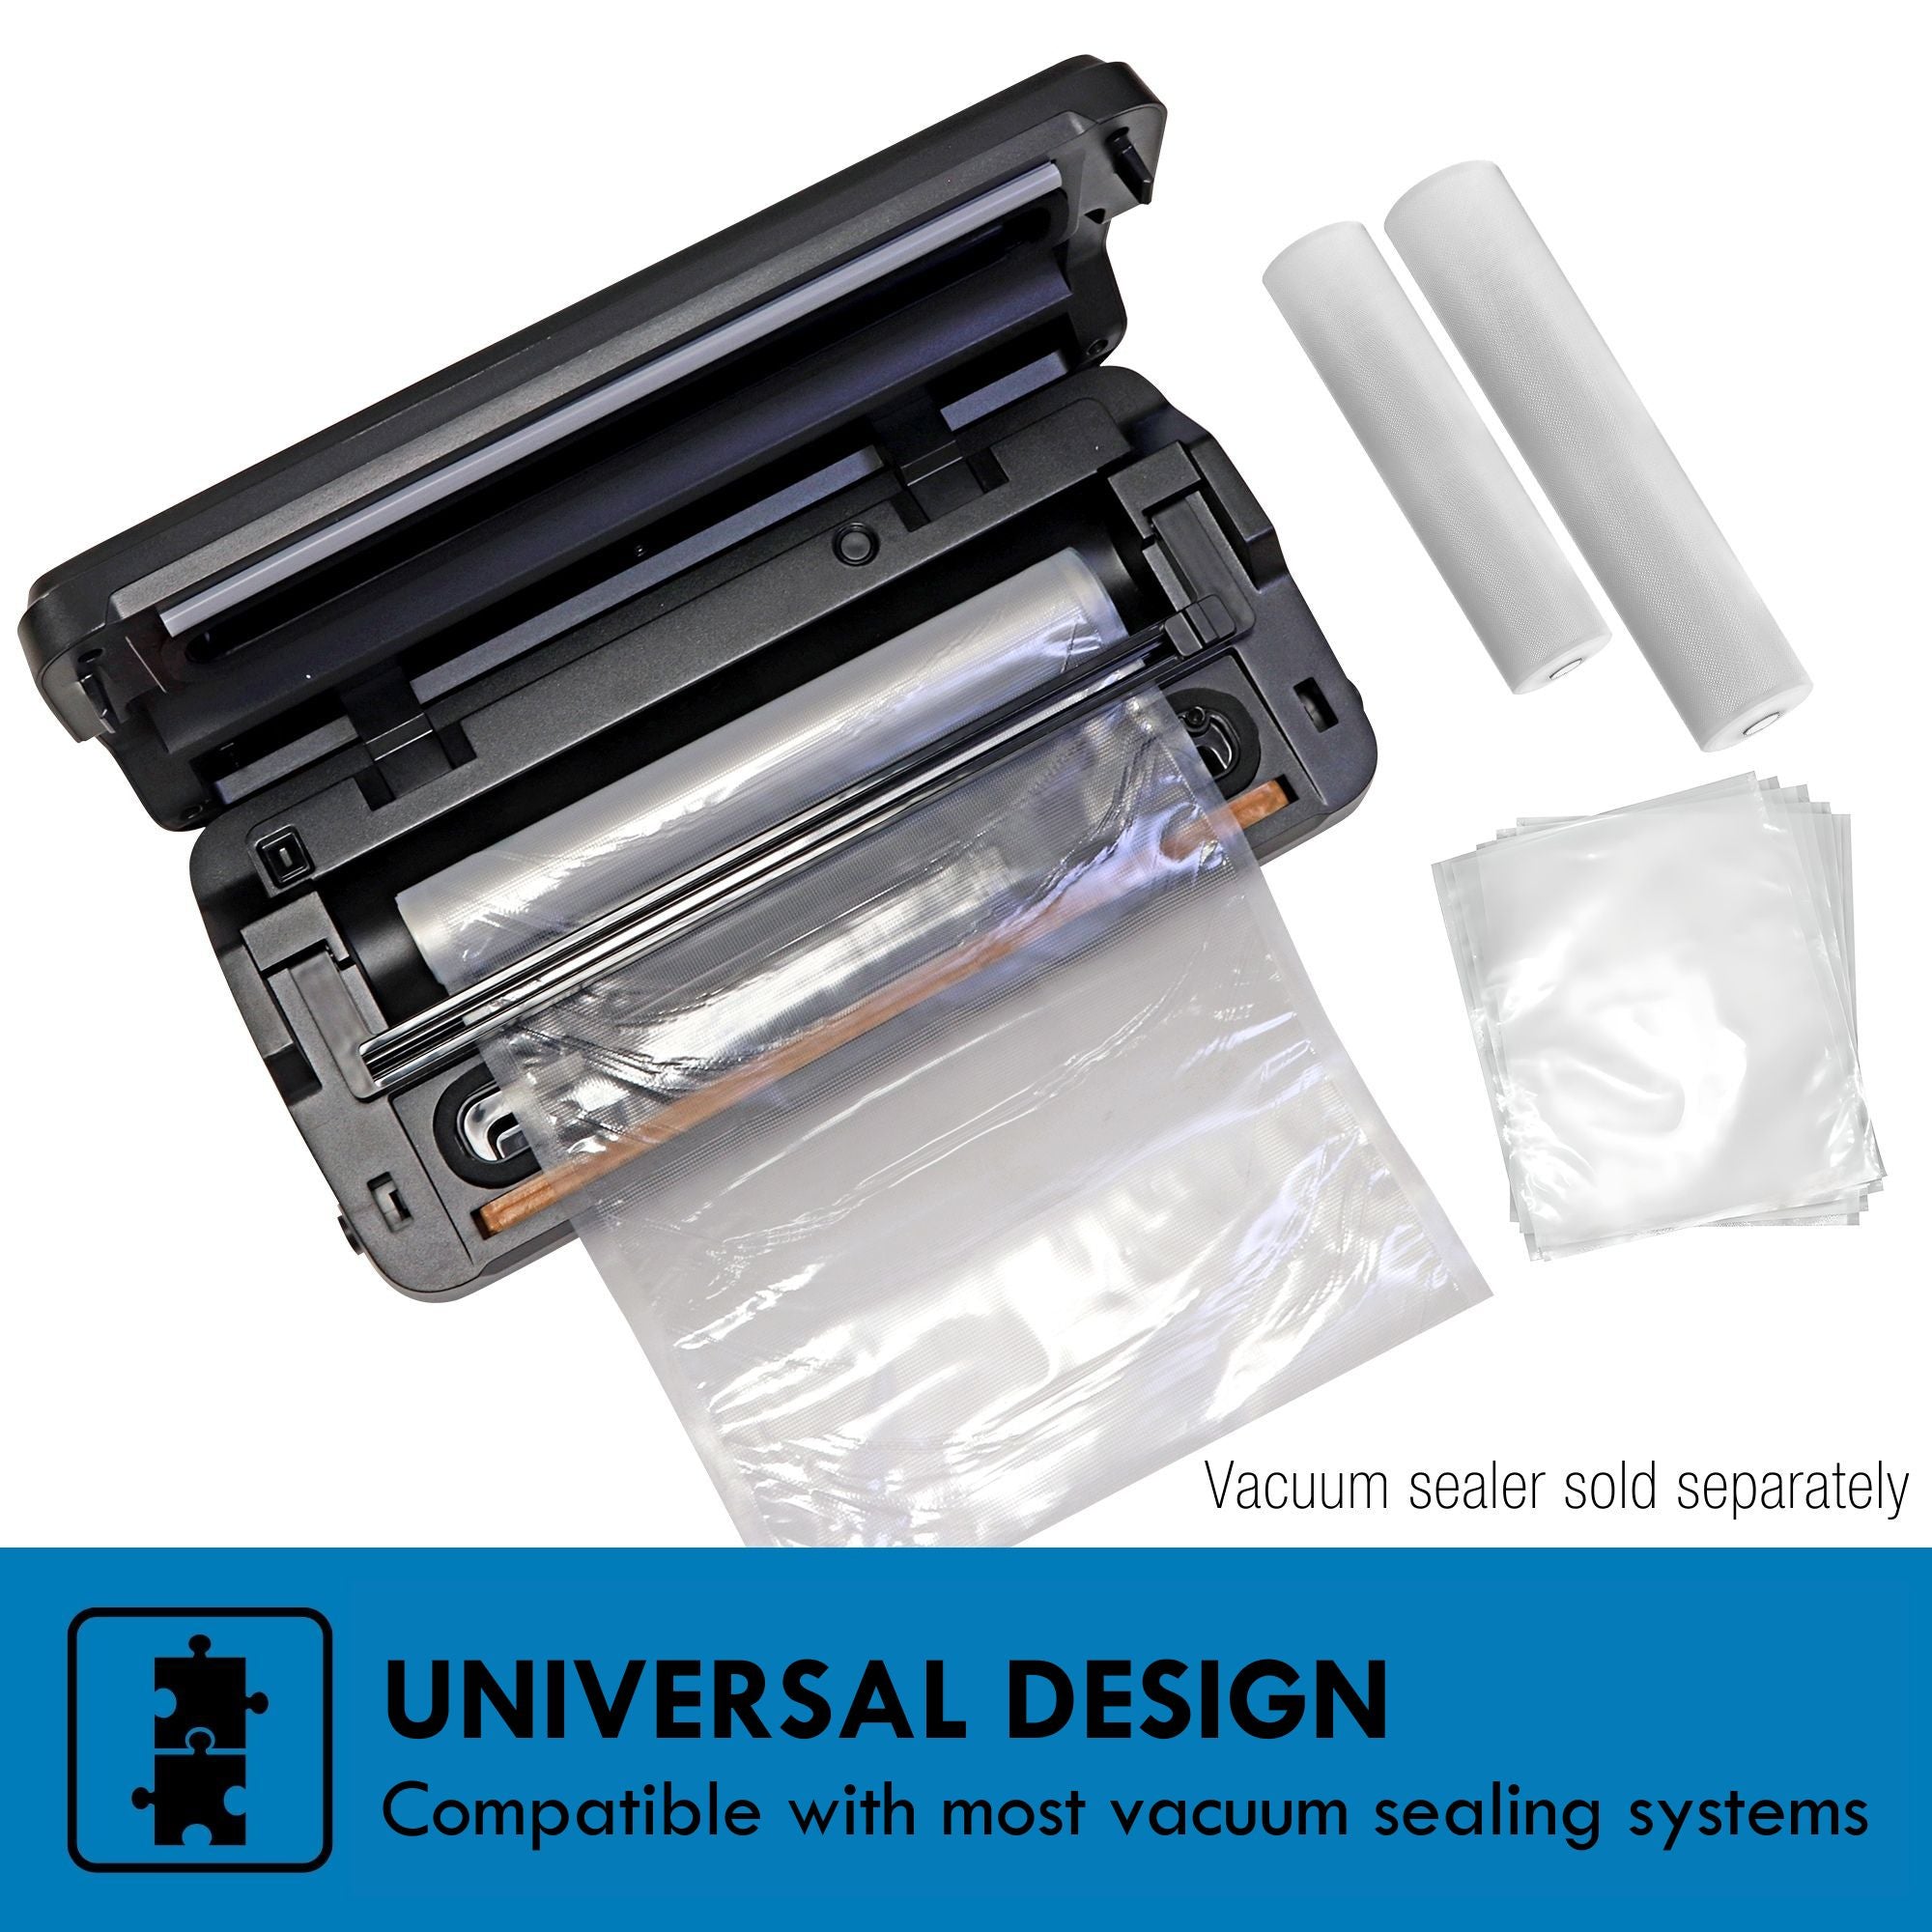 Kenmore vacuum food sealer, open with a bag roll inside and pre-cut bags and bag rolls beside it, on a white background. Text below reads, "Universal design: Compatible with most vacuum sealing systems"